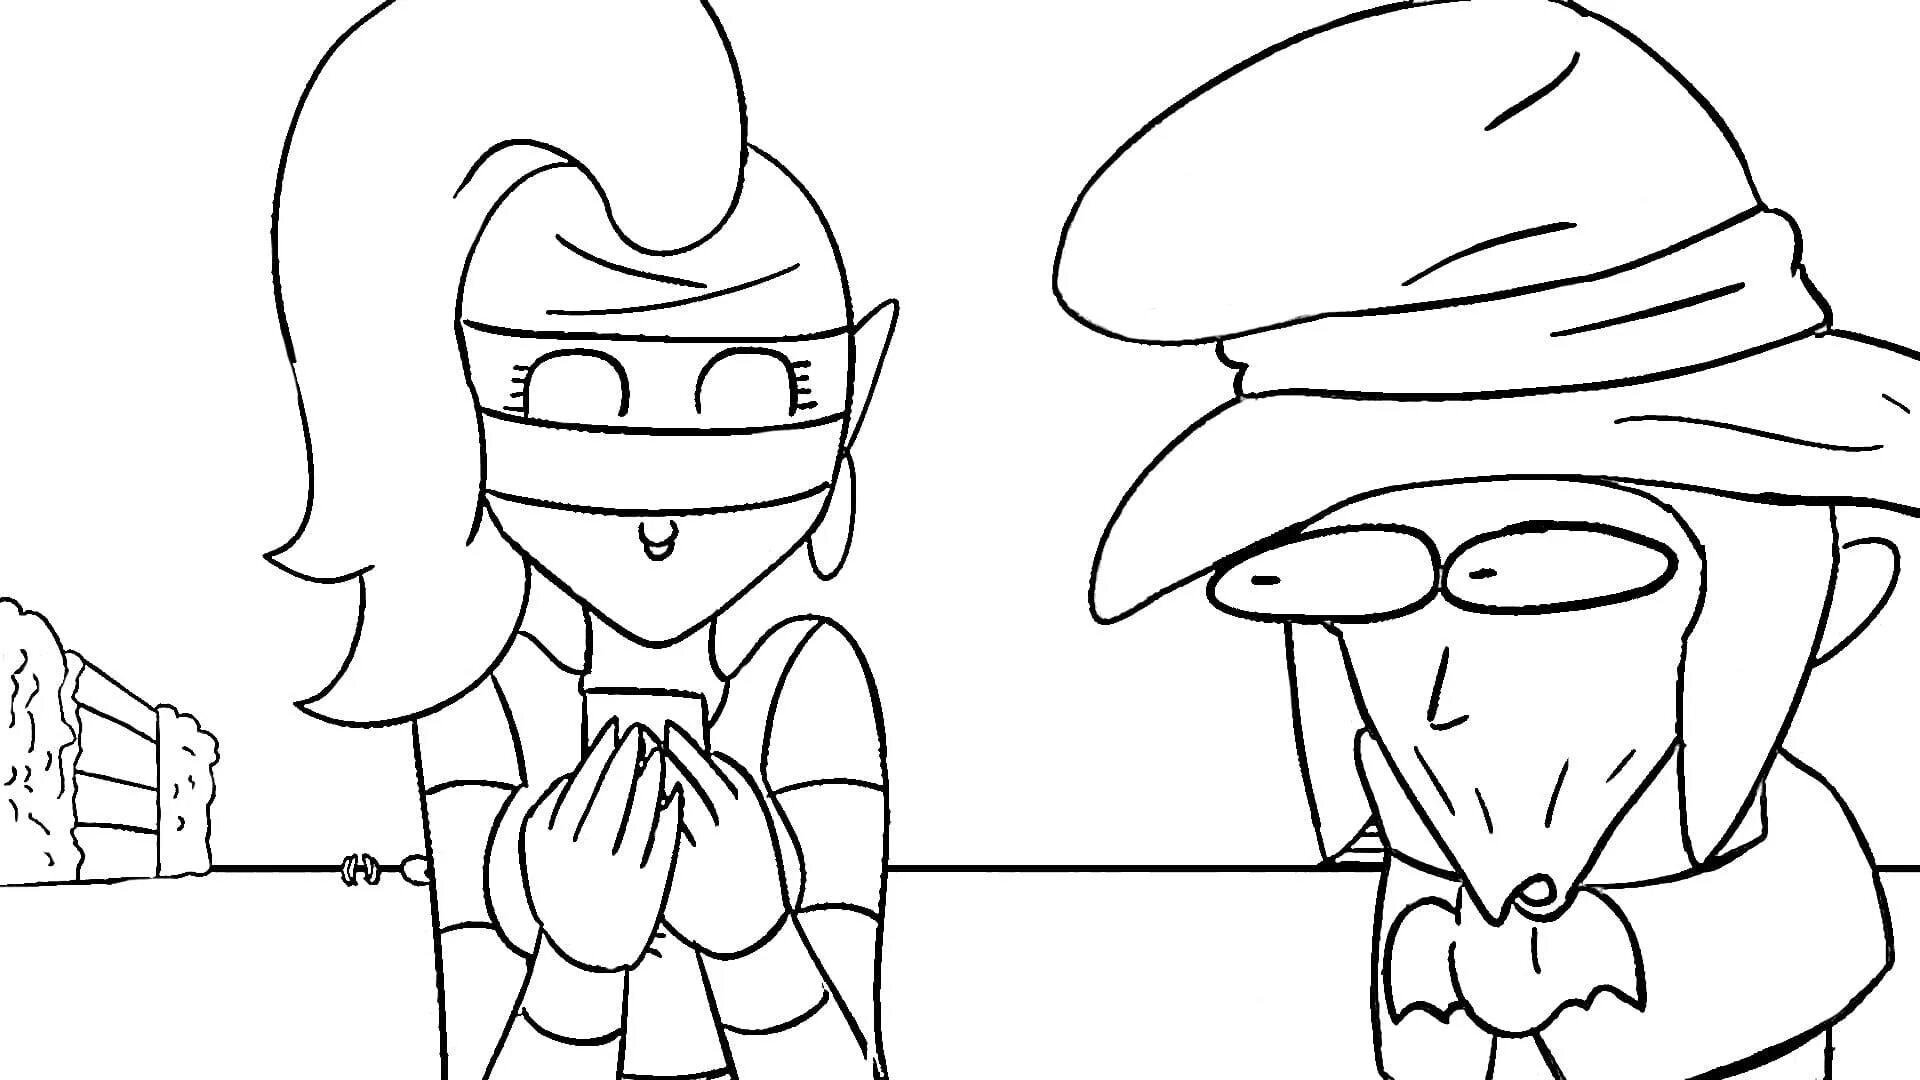 Dynamic mortis coloring page